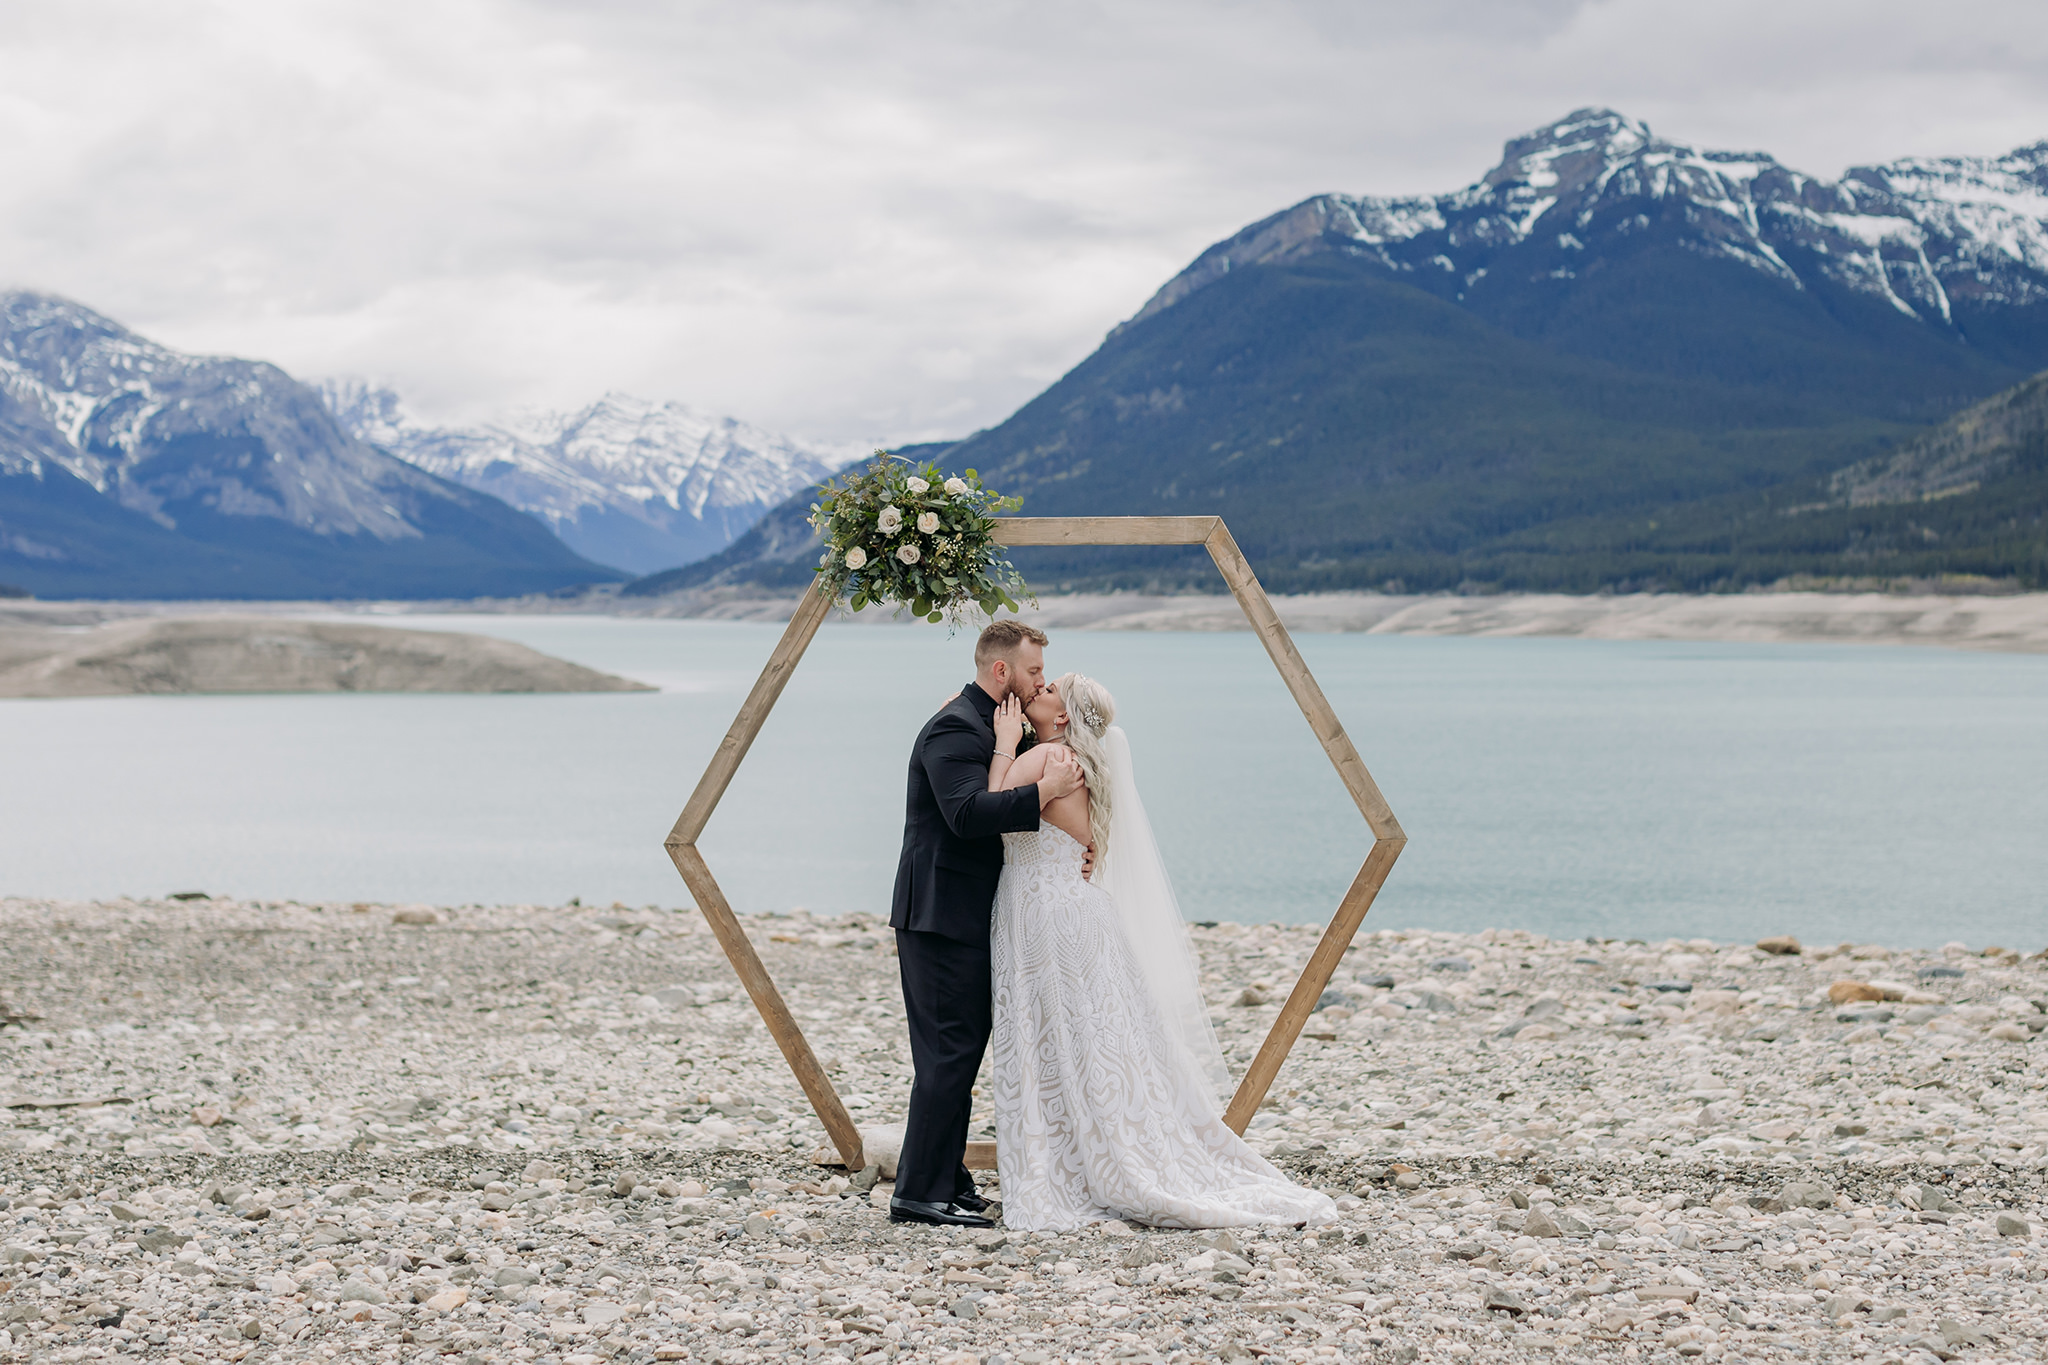 Abraham Lake Spring Mountain wedding with outdoor wedding portraits blue waters & mountains in the distance